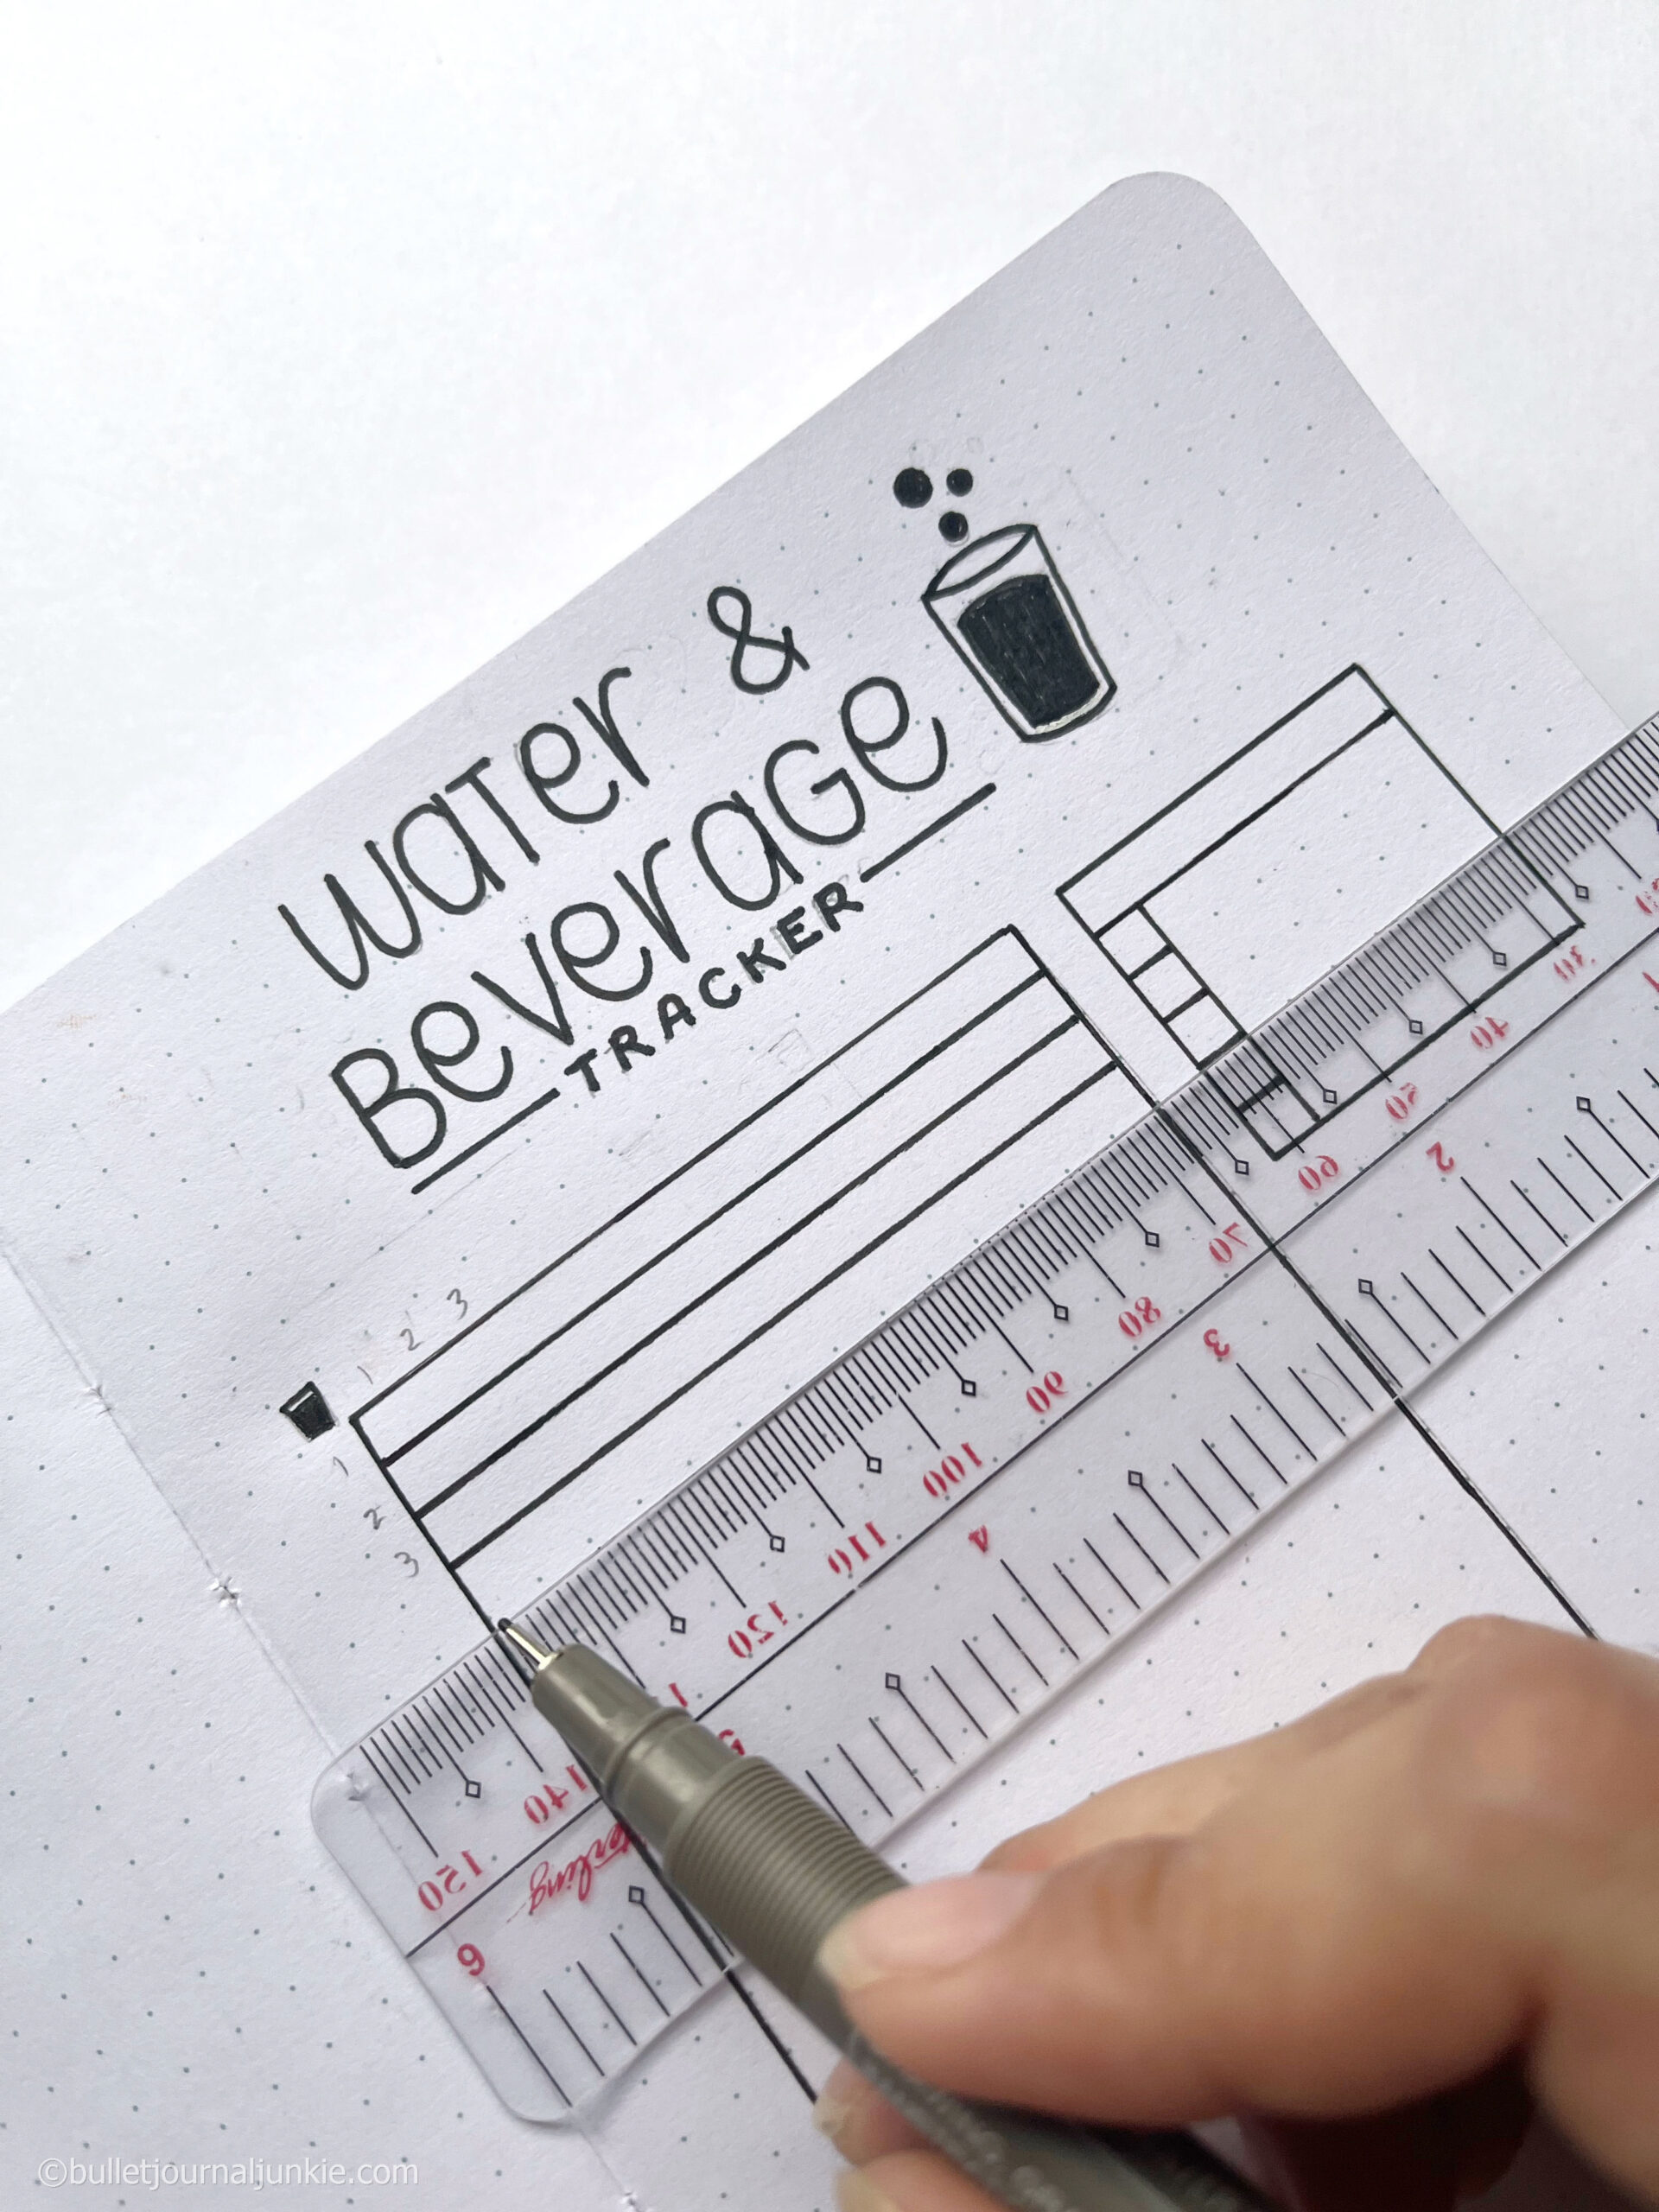 Using a ruler a hand draws a straight line on a water drinking tracker and a bullet journal.